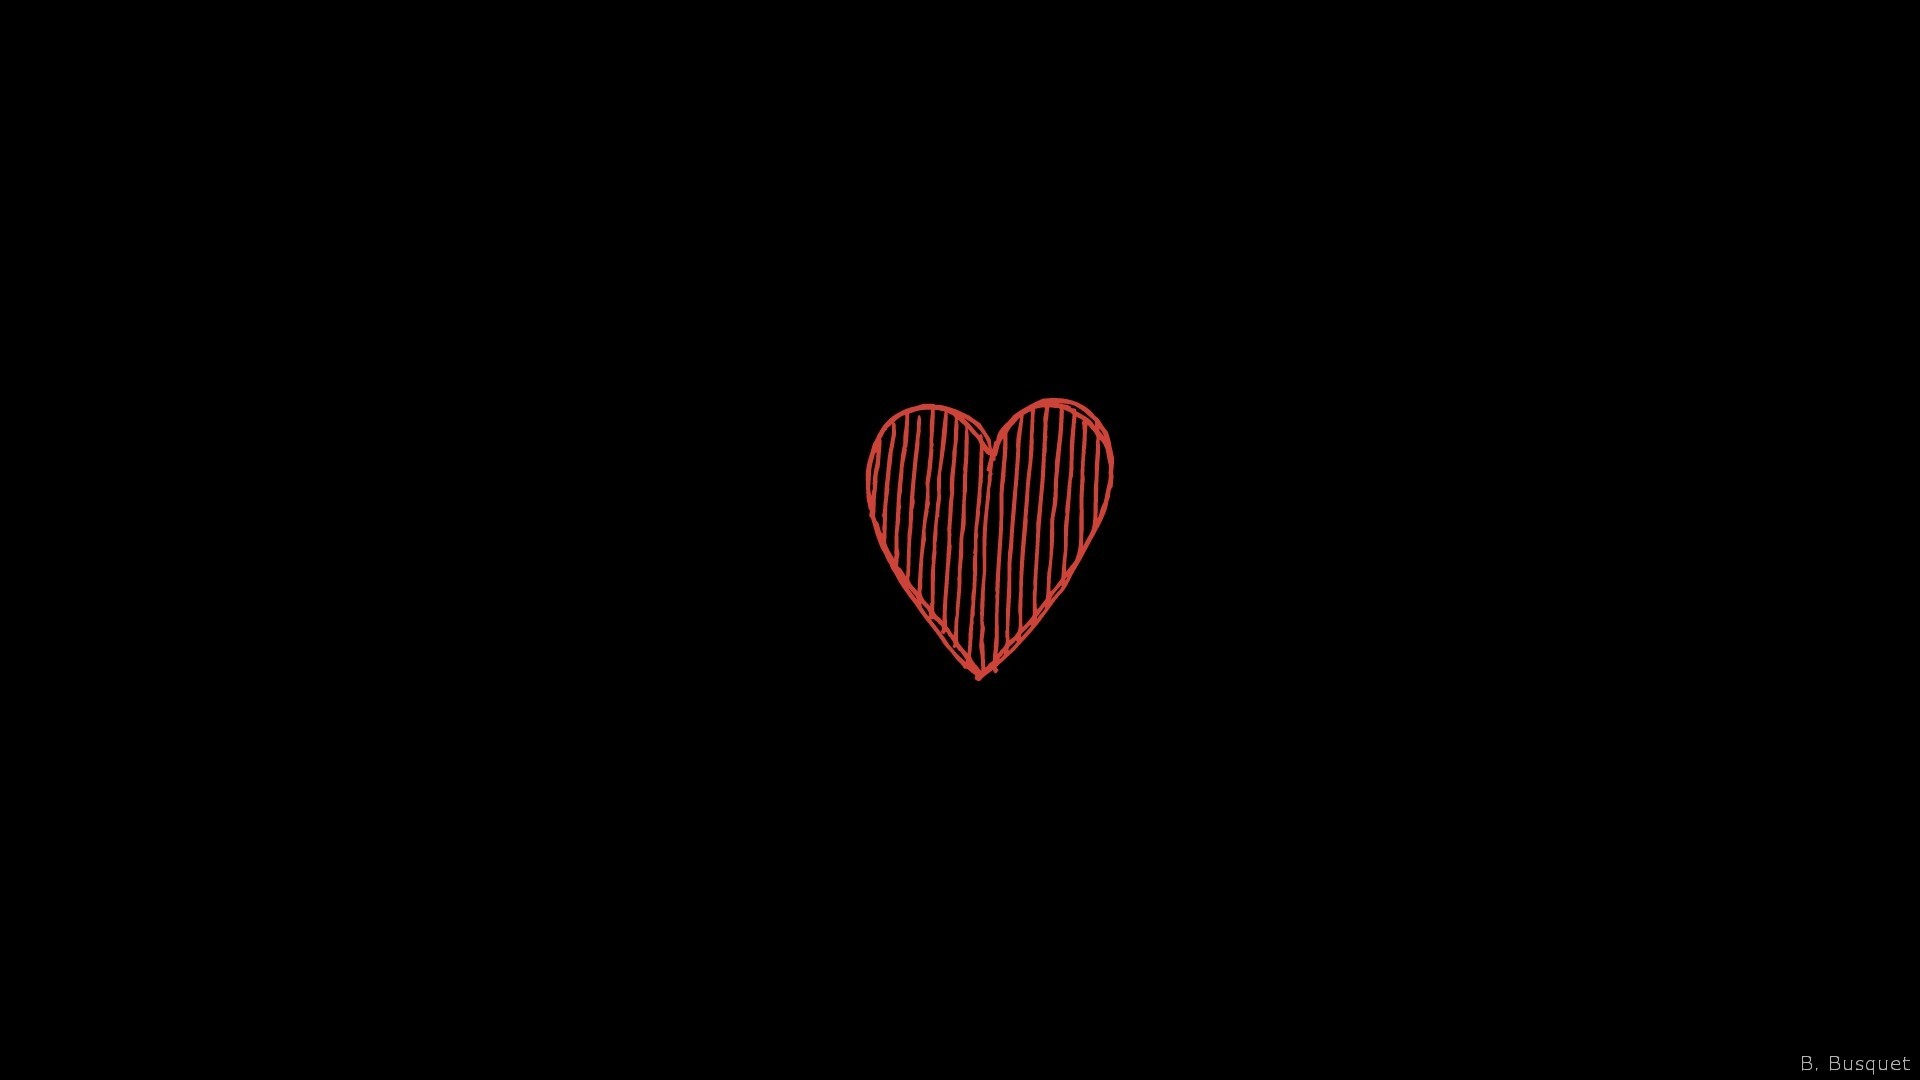 1920x1080 Black wallpaper with a heart with red stripes in the center.